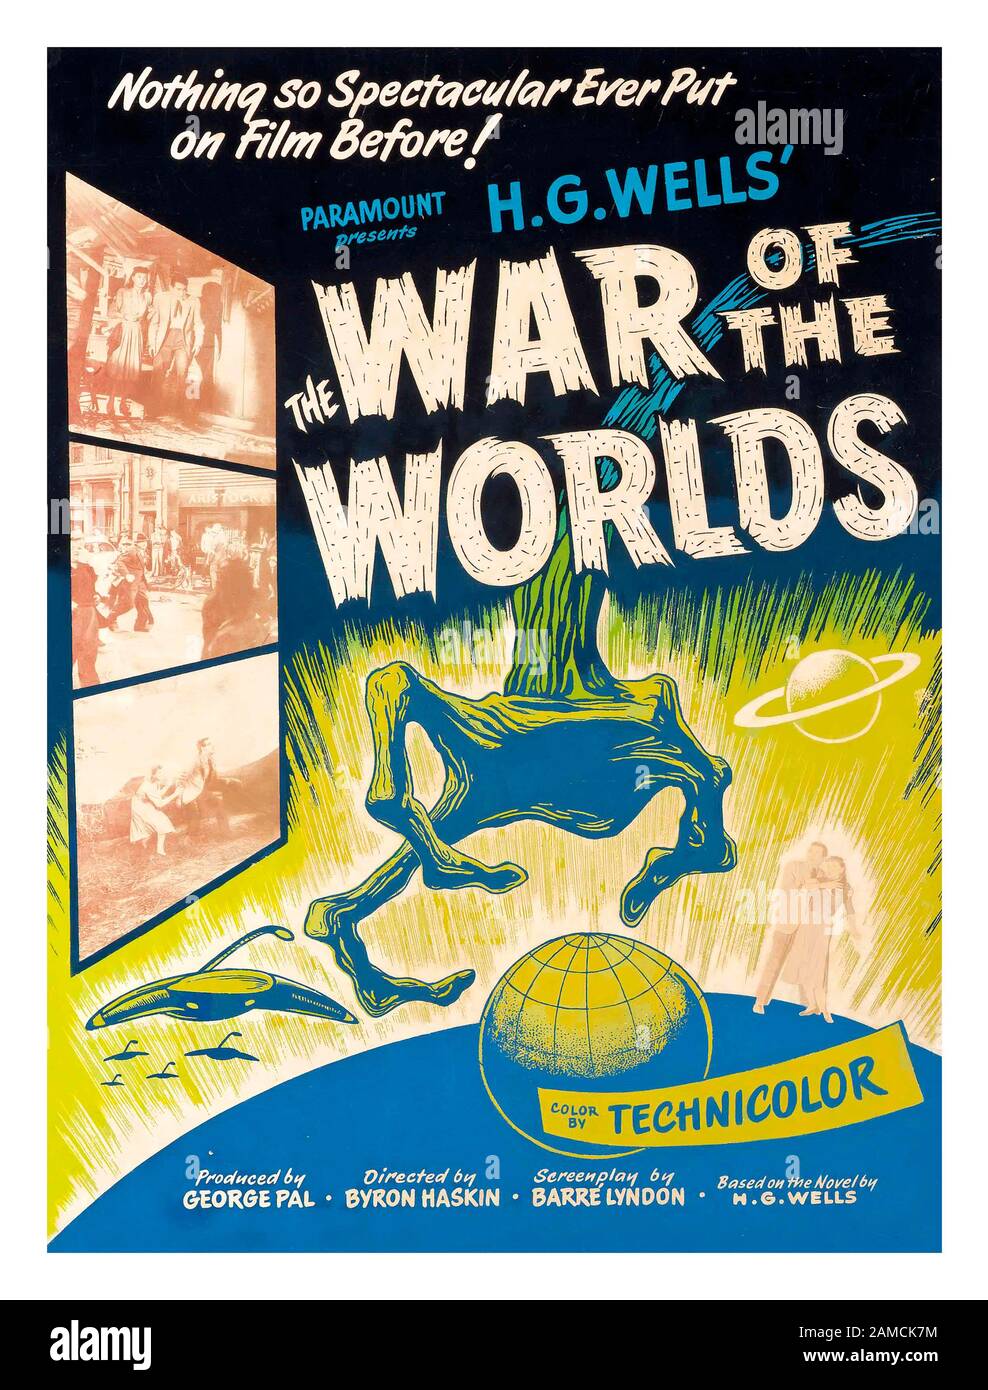 The WAR OF THE WORLDS Vintage 1950s Science Fiction Movie Film Poster by HG WELLS 1953, Paramount, USA Stockfoto